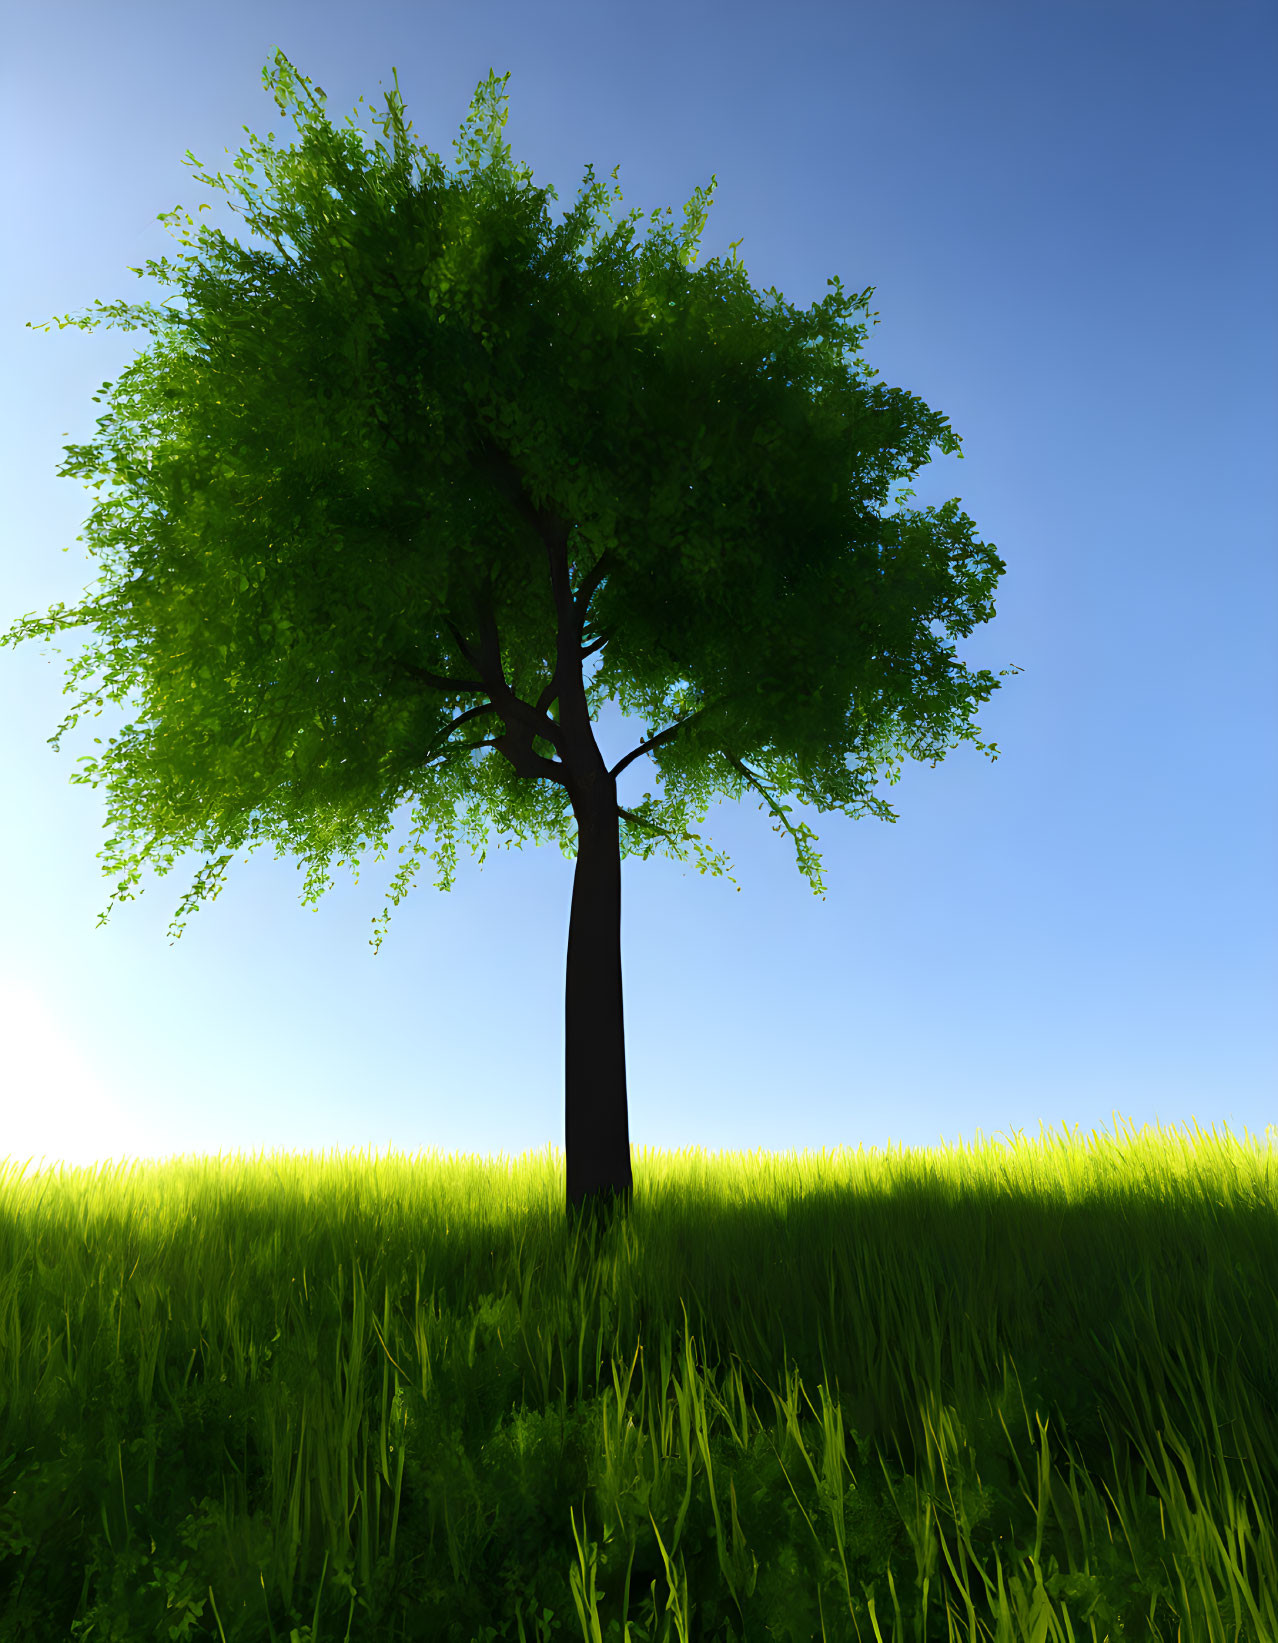 Lone tree with lush green leaves in vibrant field against clear blue sky